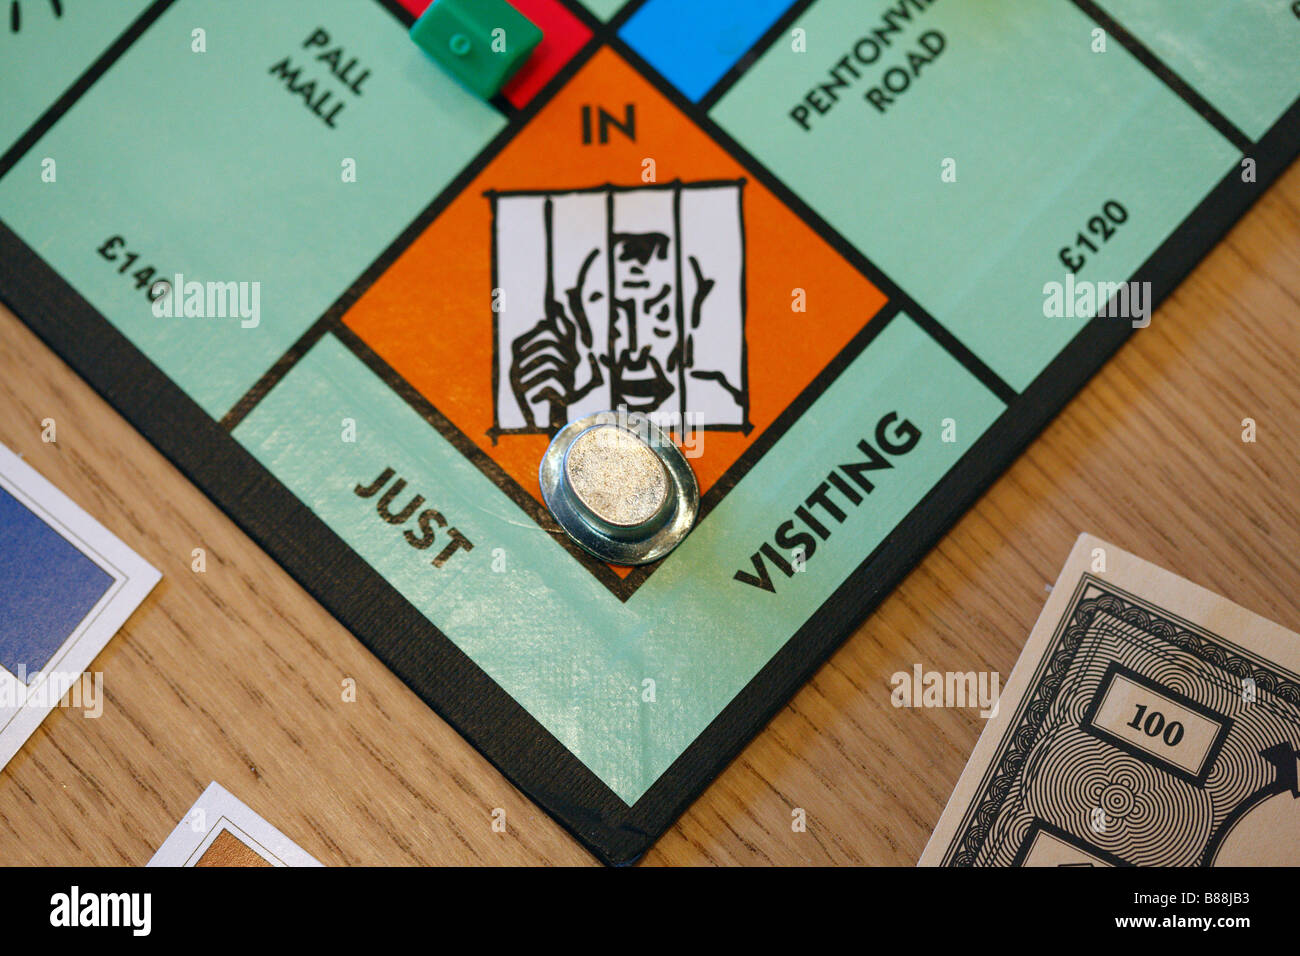 The Jail box in the board game Monopoly. Stock Photo